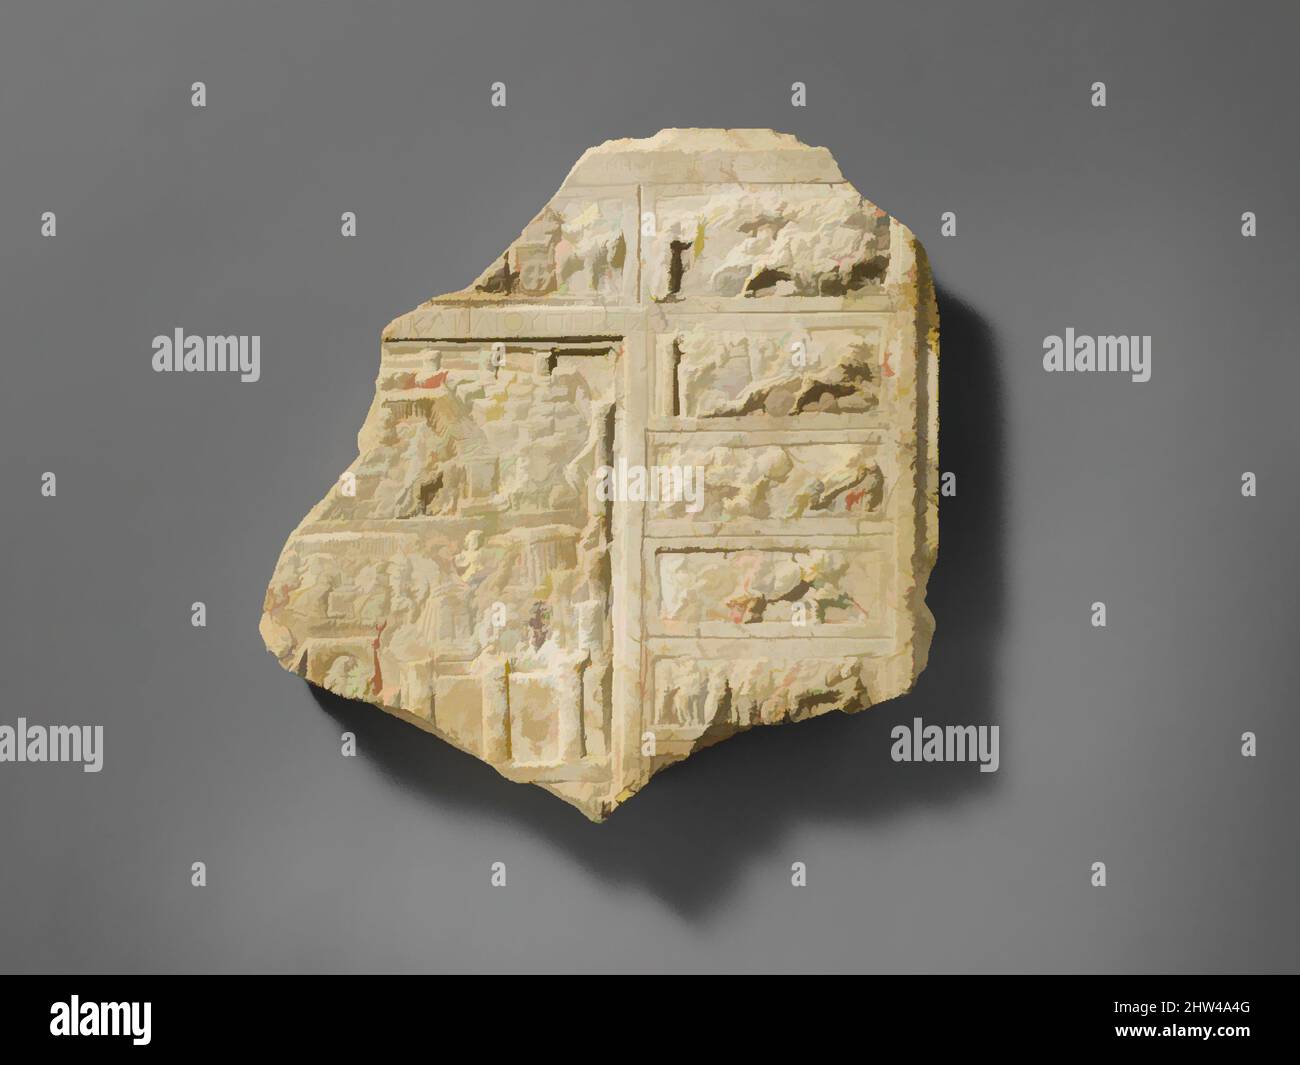 Art inspired by Marble relief fragment with scenes from the Trojan War, Early Imperial, Julio-Claudian, 1st half of 1st century A.D., Roman, Marble, Palombino, 7 1/8 x 6 15/16 in., 1.1kg (18.1 x 17.6 cm), Stone Sculpture, The tabulae iliacae are a series of tablets covered with, Classic works modernized by Artotop with a splash of modernity. Shapes, color and value, eye-catching visual impact on art. Emotions through freedom of artworks in a contemporary way. A timeless message pursuing a wildly creative new direction. Artists turning to the digital medium and creating the Artotop NFT Stock Photo